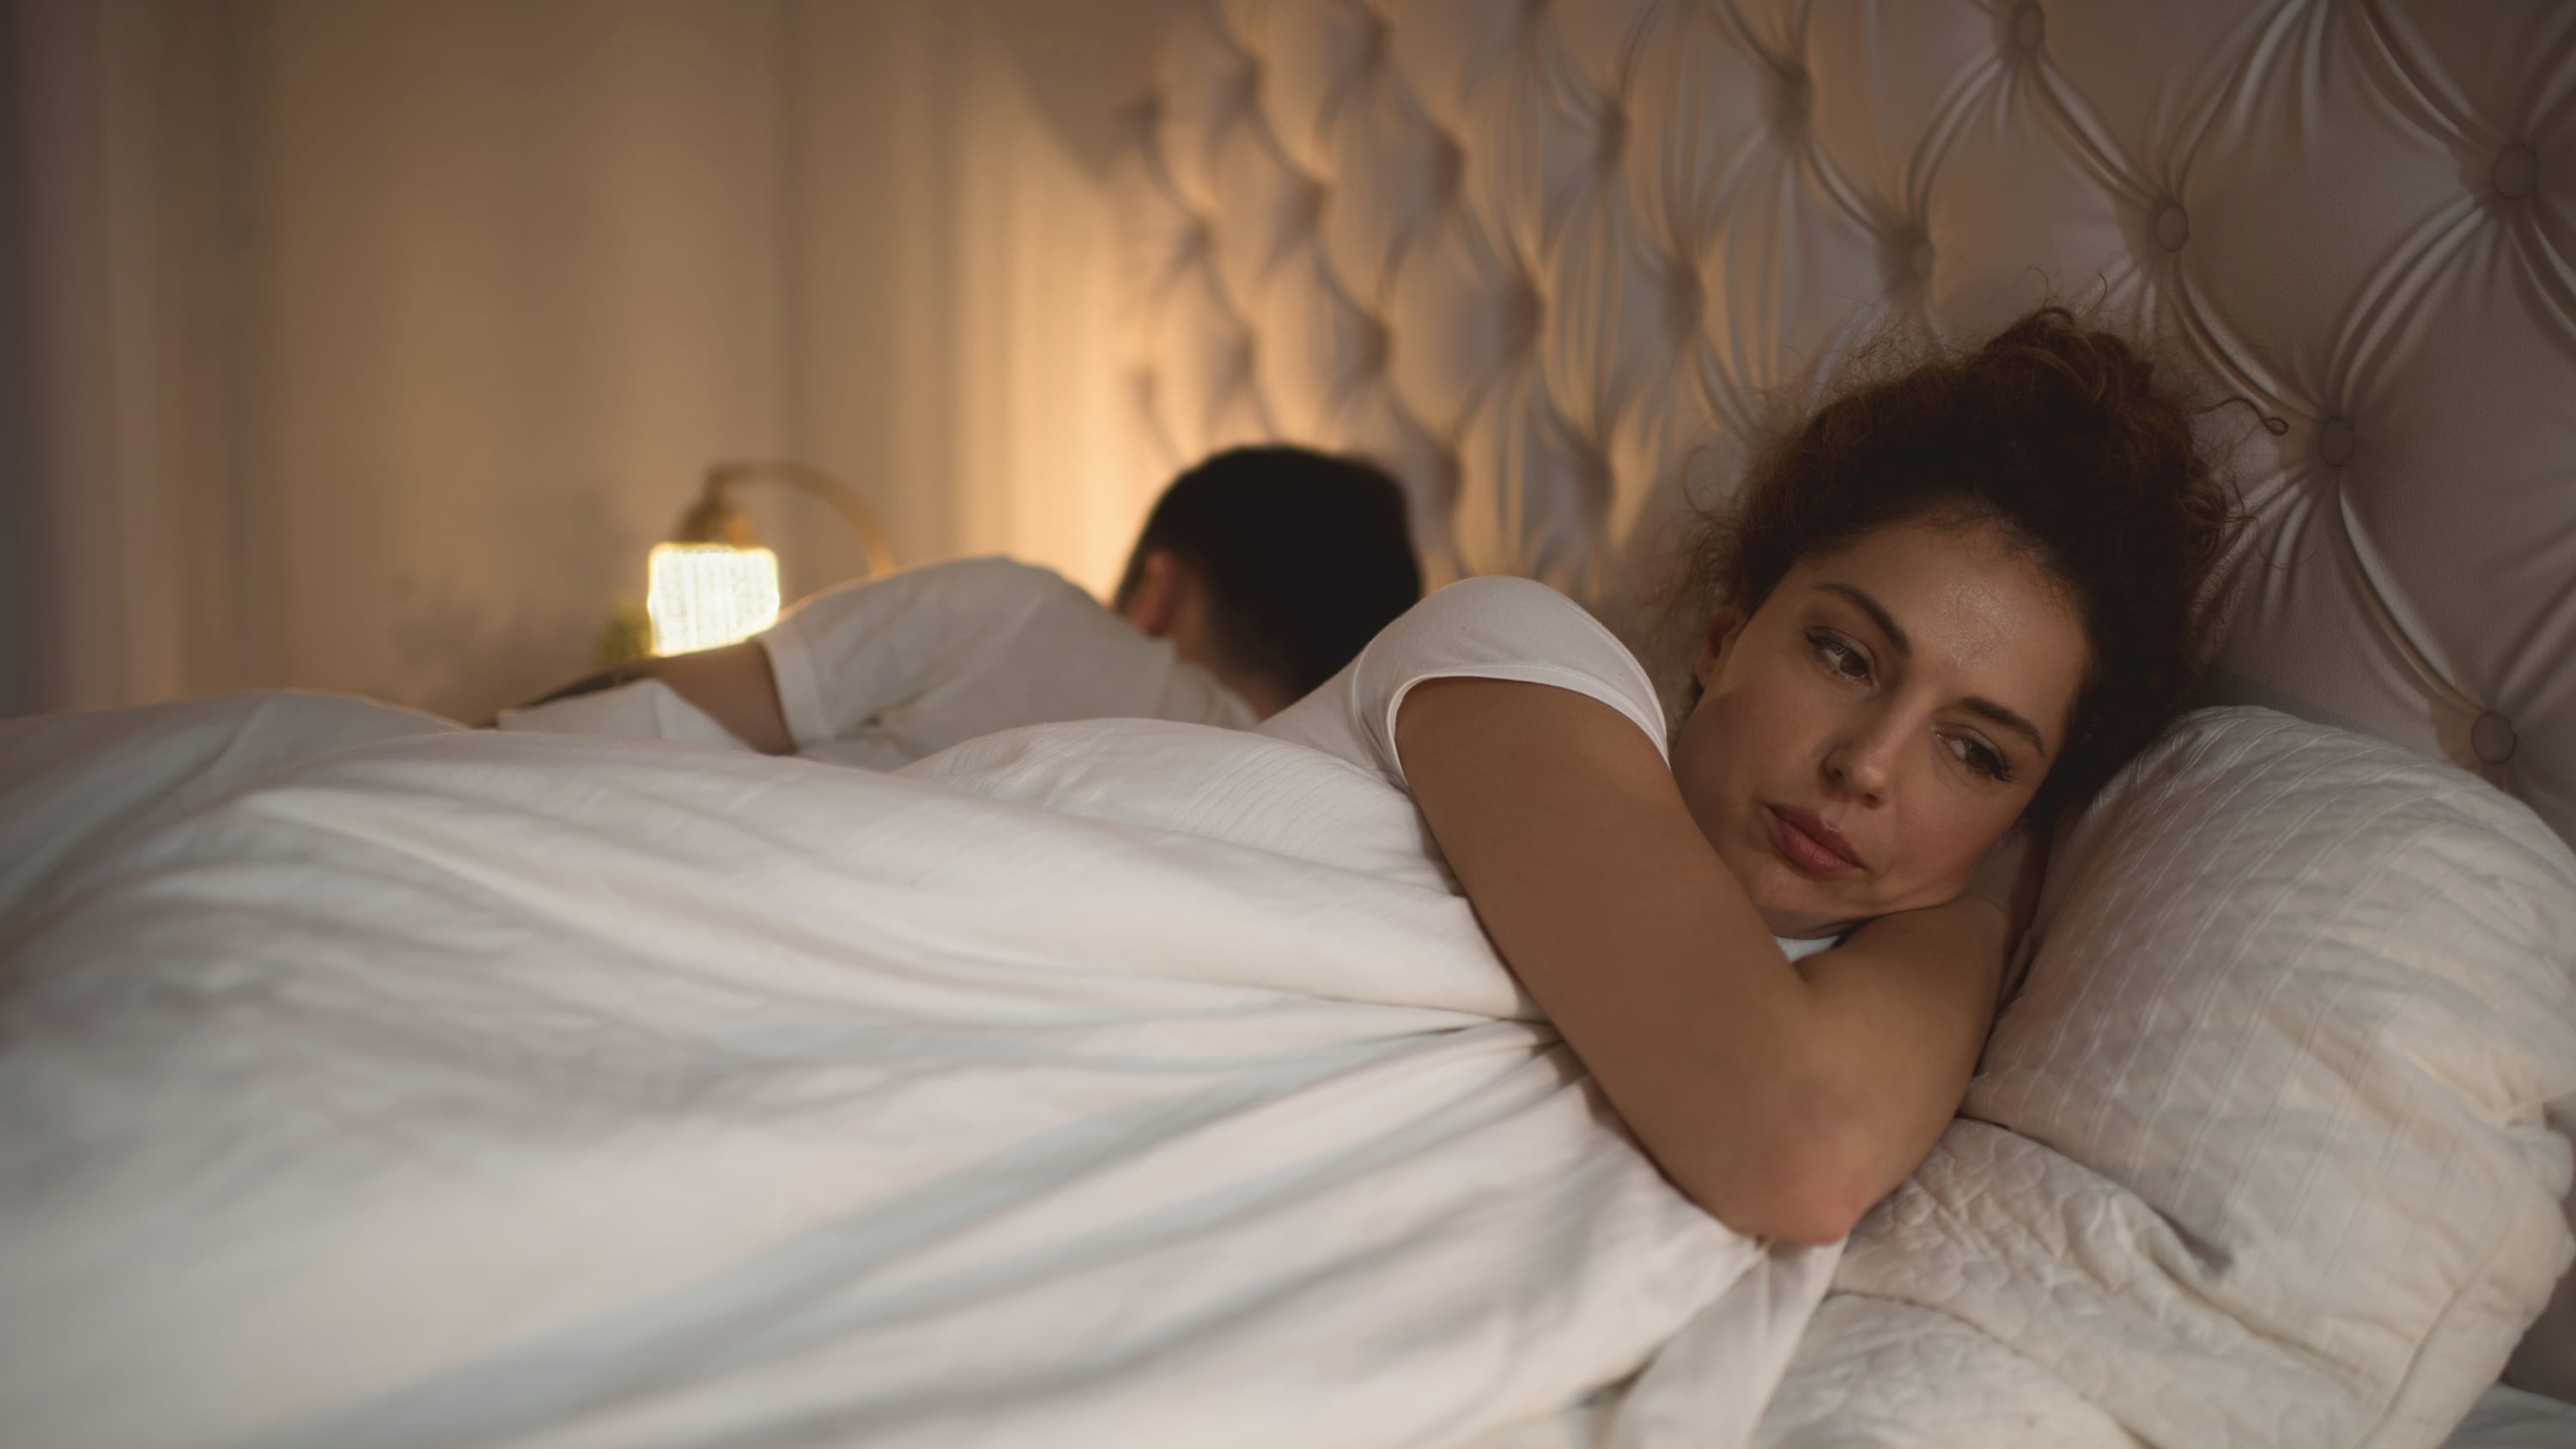 Woman lying in bed awake with her partner next to her asleep.